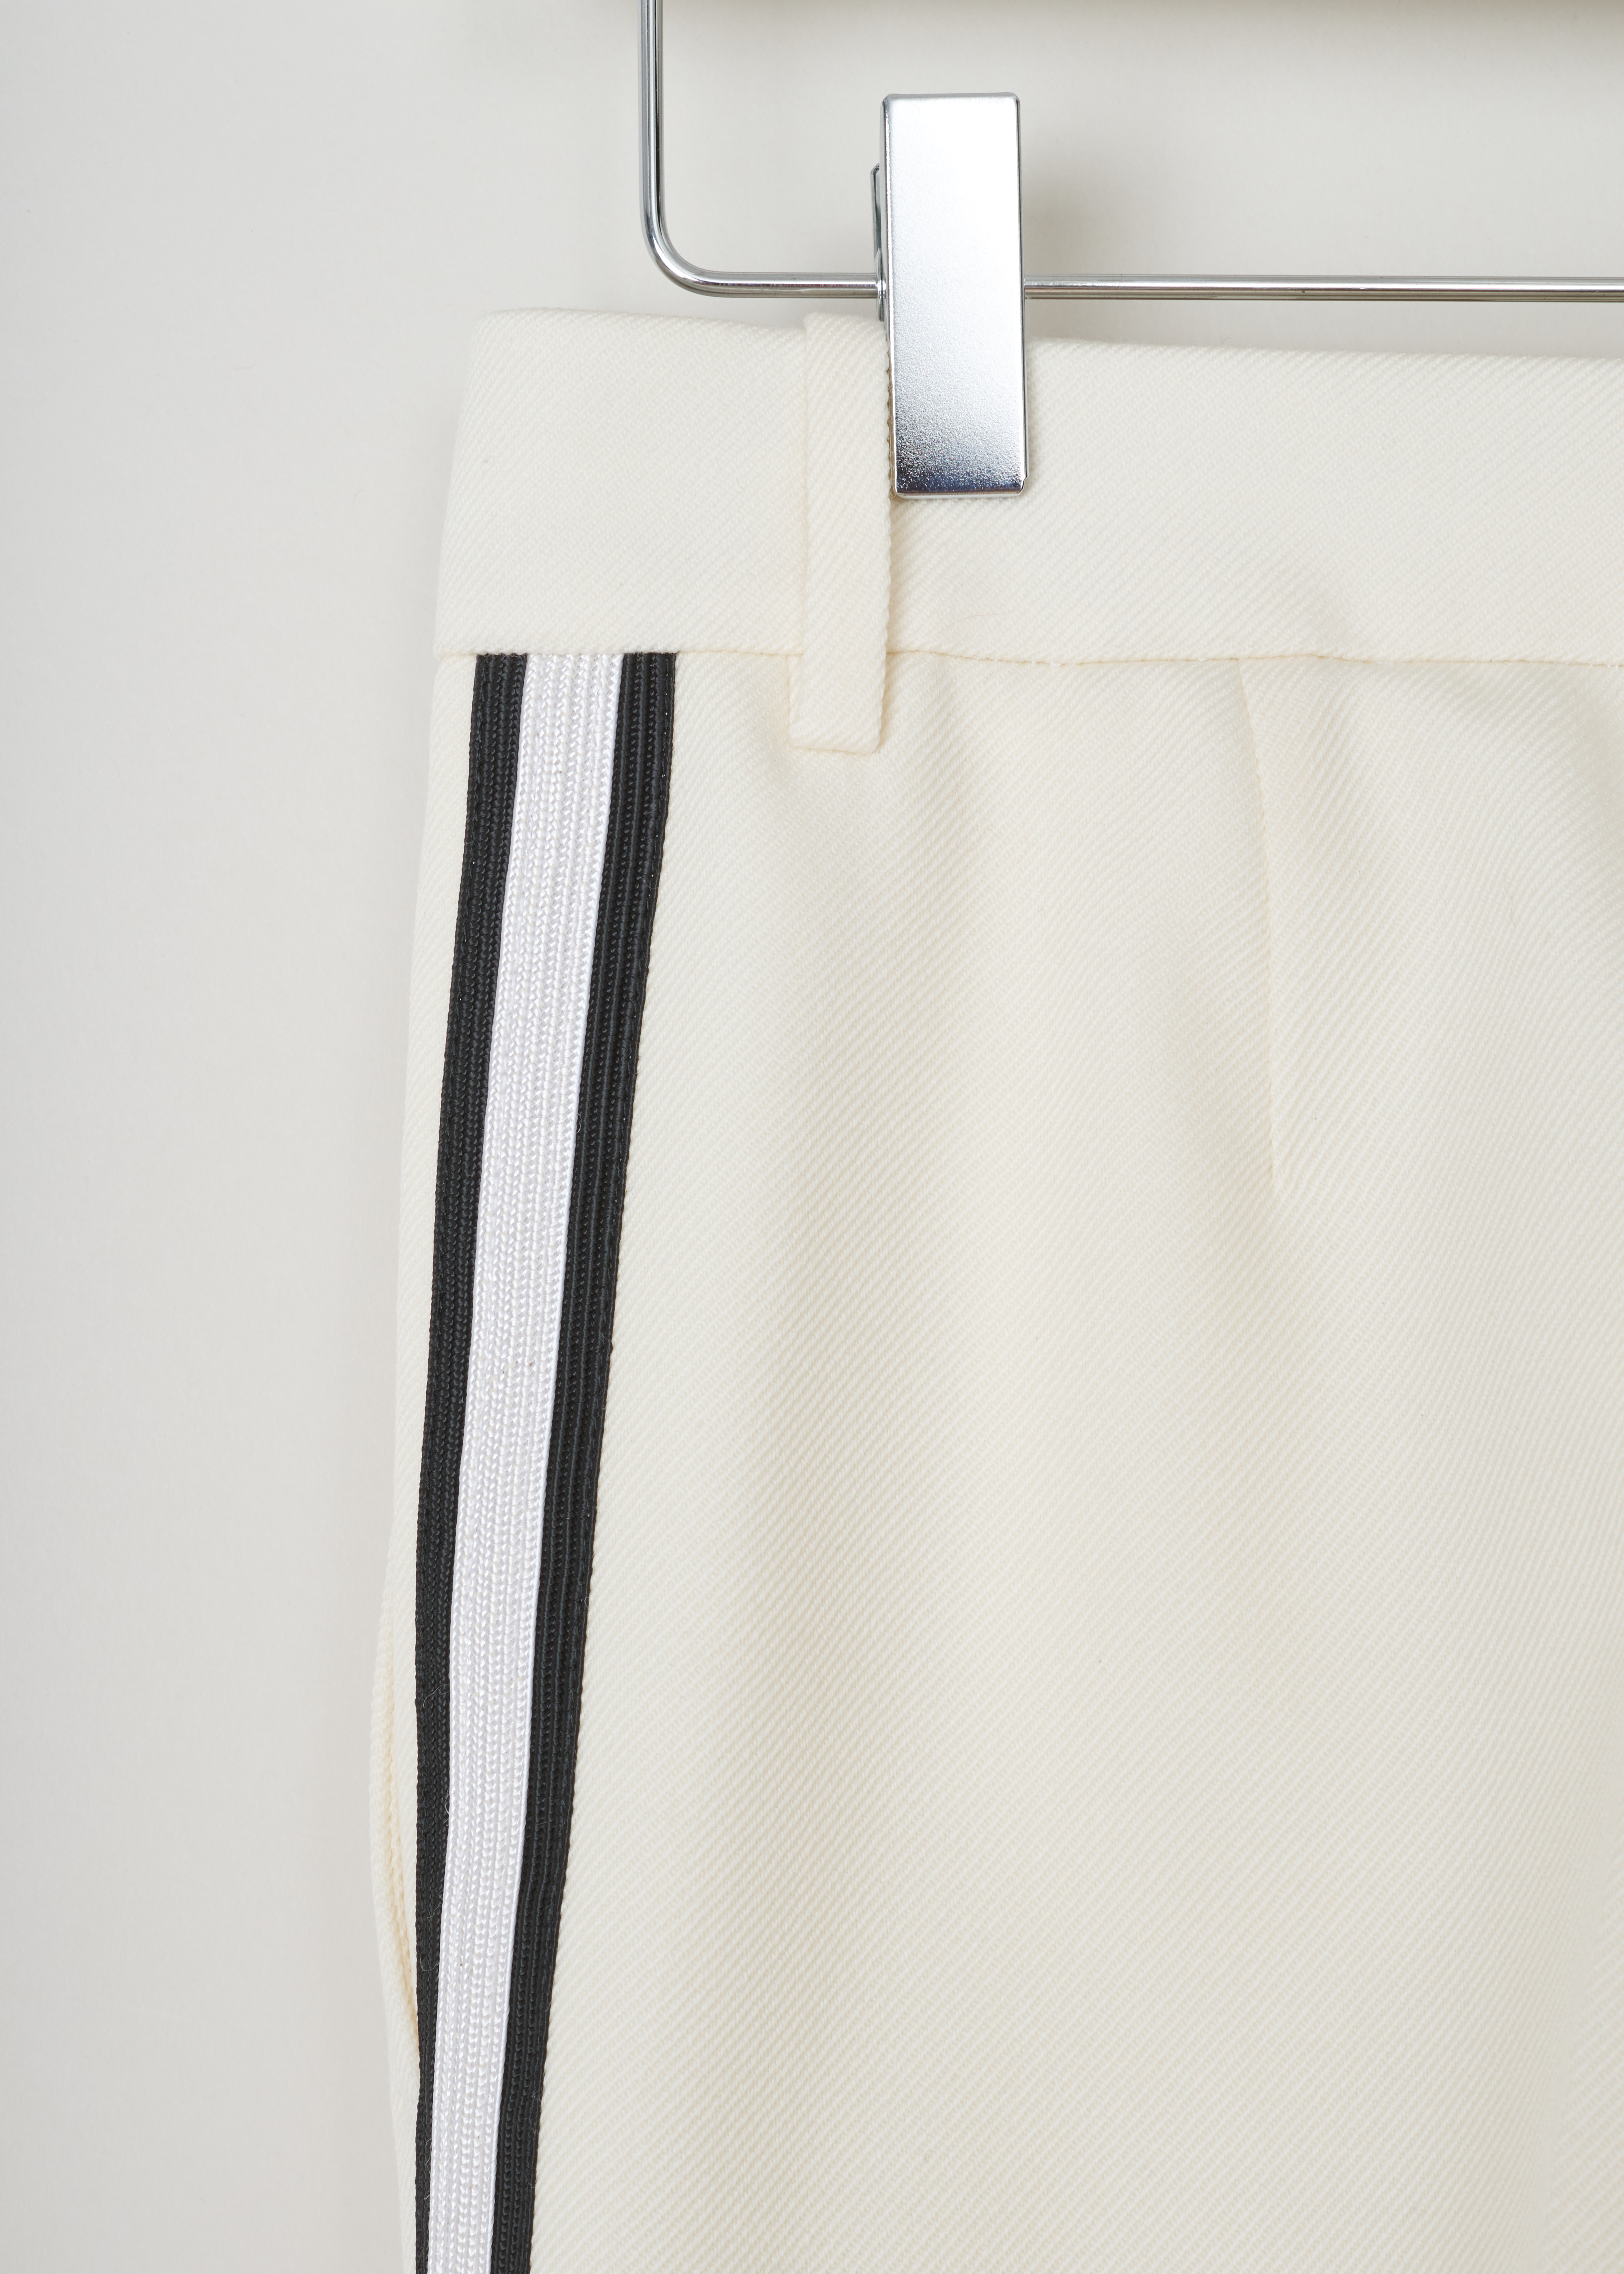 Calvin Klein 205W39NYC White pants with ribbon trim84WWPB22_W037_197 off-white detail. Off-white wool pants with a white and black side ribbon trim.
These straight pants have two slant pockets on the front and a welt pocket on the back.